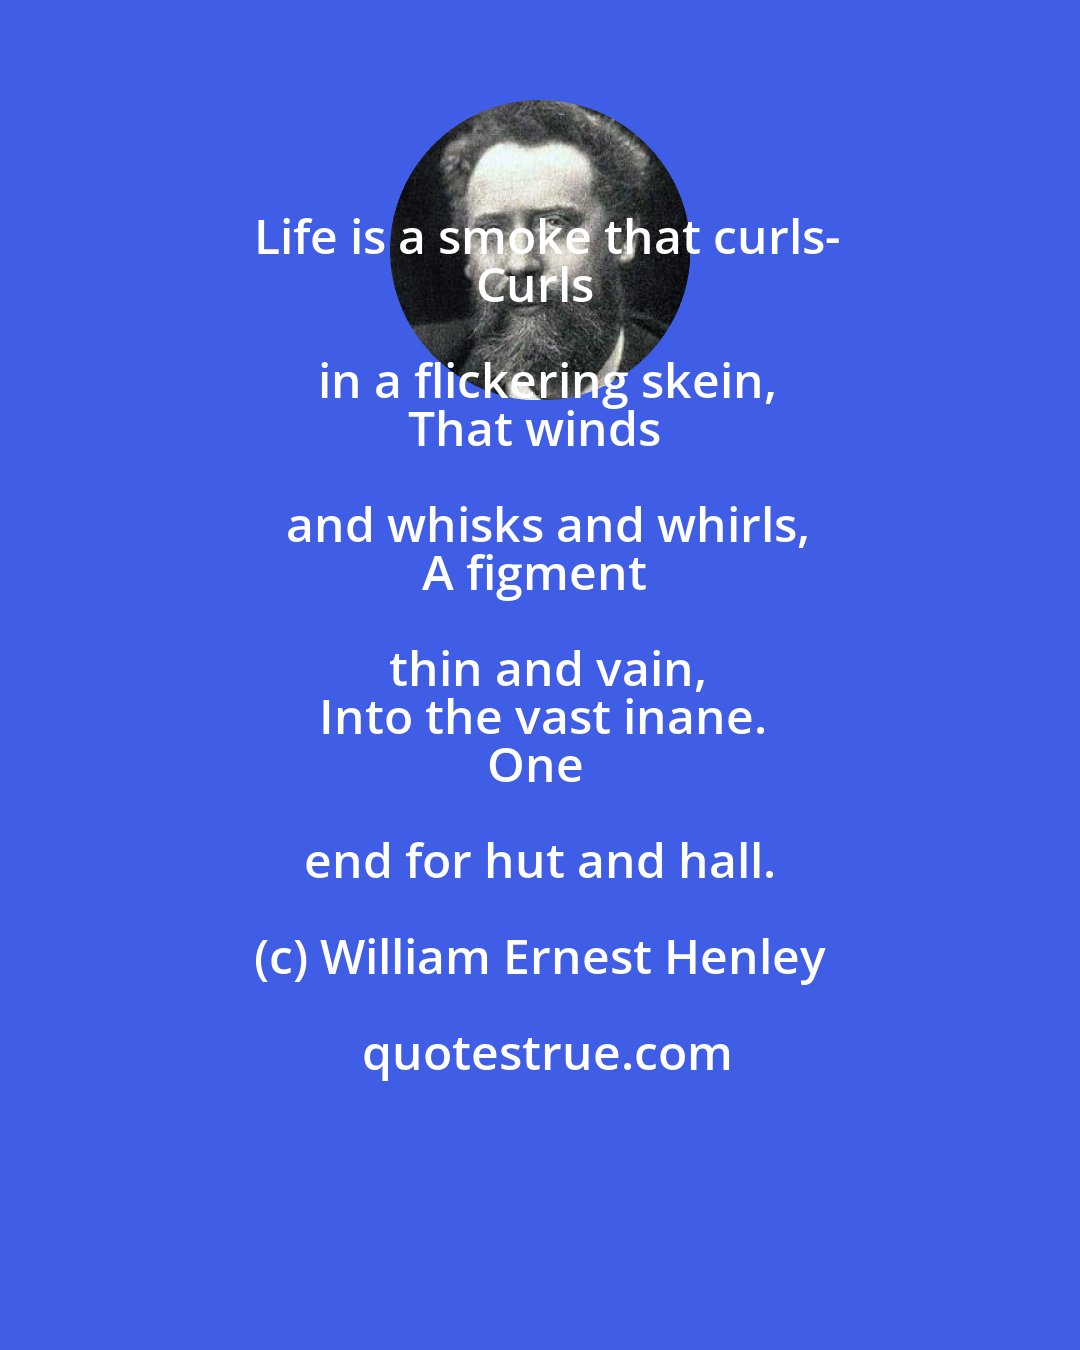 William Ernest Henley: Life is a smoke that curls-
Curls in a flickering skein,
That winds and whisks and whirls,
A figment thin and vain,
Into the vast inane.
One end for hut and hall.